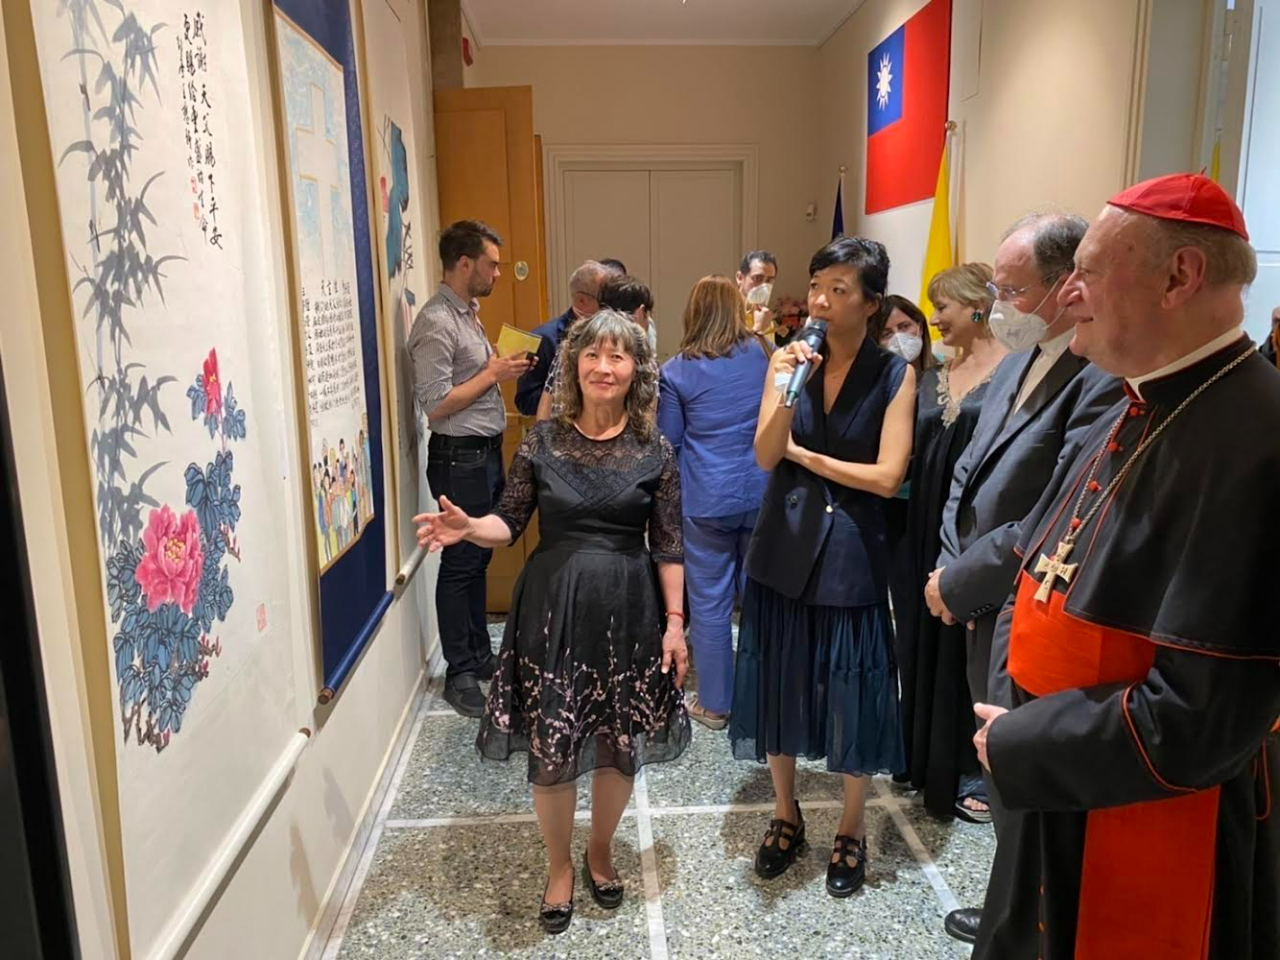      “St. Paul used to say that we must praise God with words, work and lyrics,” said Cardinal Gianfranco Ravasi at the inauguration ceremony of “Friendly Taiwan meets Fratelli tutti” exhibition held on Friday, July 1st, 2022 at the Chancery of the ROC (Taiwan) Embassy to the Holy See. He then added that “The truth conveyed by the contents of Fratelli tutti encourages us to do good but, at the same time, it is also conveyed through the artworks of Taiwanese artists.
     Cardinal Ravasi of the Dicastery for Culture and Education opened the exhibition with a prayer as to include the voice of Pope Francis through a passage of Fratelli tutti: “Inspire in us a dream of renewed encounter, dialogue, justice and peace. Move us to create healthier societies and a more dignified world, a world without hunger, poverty, violence and war.”
     Inspired by the Pope’s “Culture of Encounter,” the exhibition features 18 religious calligraphy and 12 calligraphic ink painting works created by well-known Taiwanese American artists Maw Chyuan Wang and Karen Shee. Among the guests, a delegation of authorities from Taiwan, the Holy See, as well as members of the Diplomatic Corps and religious congregations.
     The thirty pieces on display contain excerpts from the Bible and the Pope’s encyclicals Laudatosì and Fratelli tutti,and other inspiring phrases to highlight Taiwan’s commitment and joint efforts with the Holy See to advance global human rights and welfare, democracy, freedom, and environmental protection. As reminded by Ambassador Matthew S.M. LEE: “The similarities between Taiwan and the Holy See are not only in the forms of artistic expression, but also in the values shared by both sides: democracy, freedom, and human rights.” 
     “Friendly Taiwan meets Fratelli tutti” exhibition celebrates the 80th anniversary of diplomatic relations between the Republic of China (Taiwan) and the Holy See by combining the Sacred Scripture with the beauty of Taiwanese calligraphy to give the audience an original and innovative experience. 

